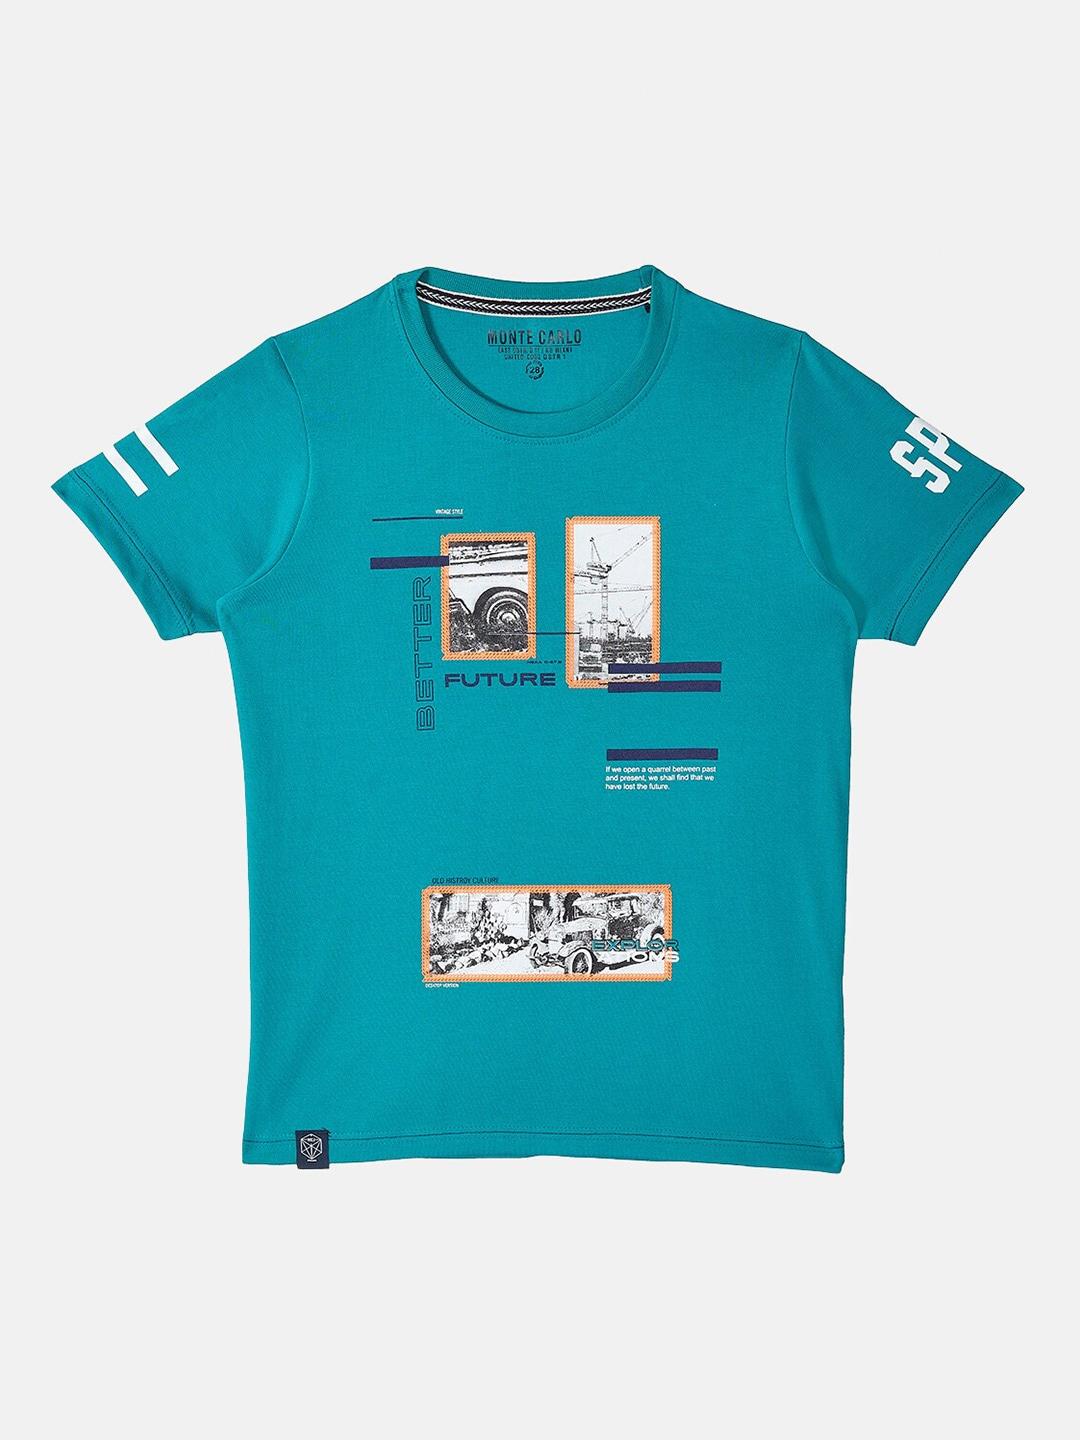 Monte Carlo Boys Teal Graphic Printed Cotton T-shirt